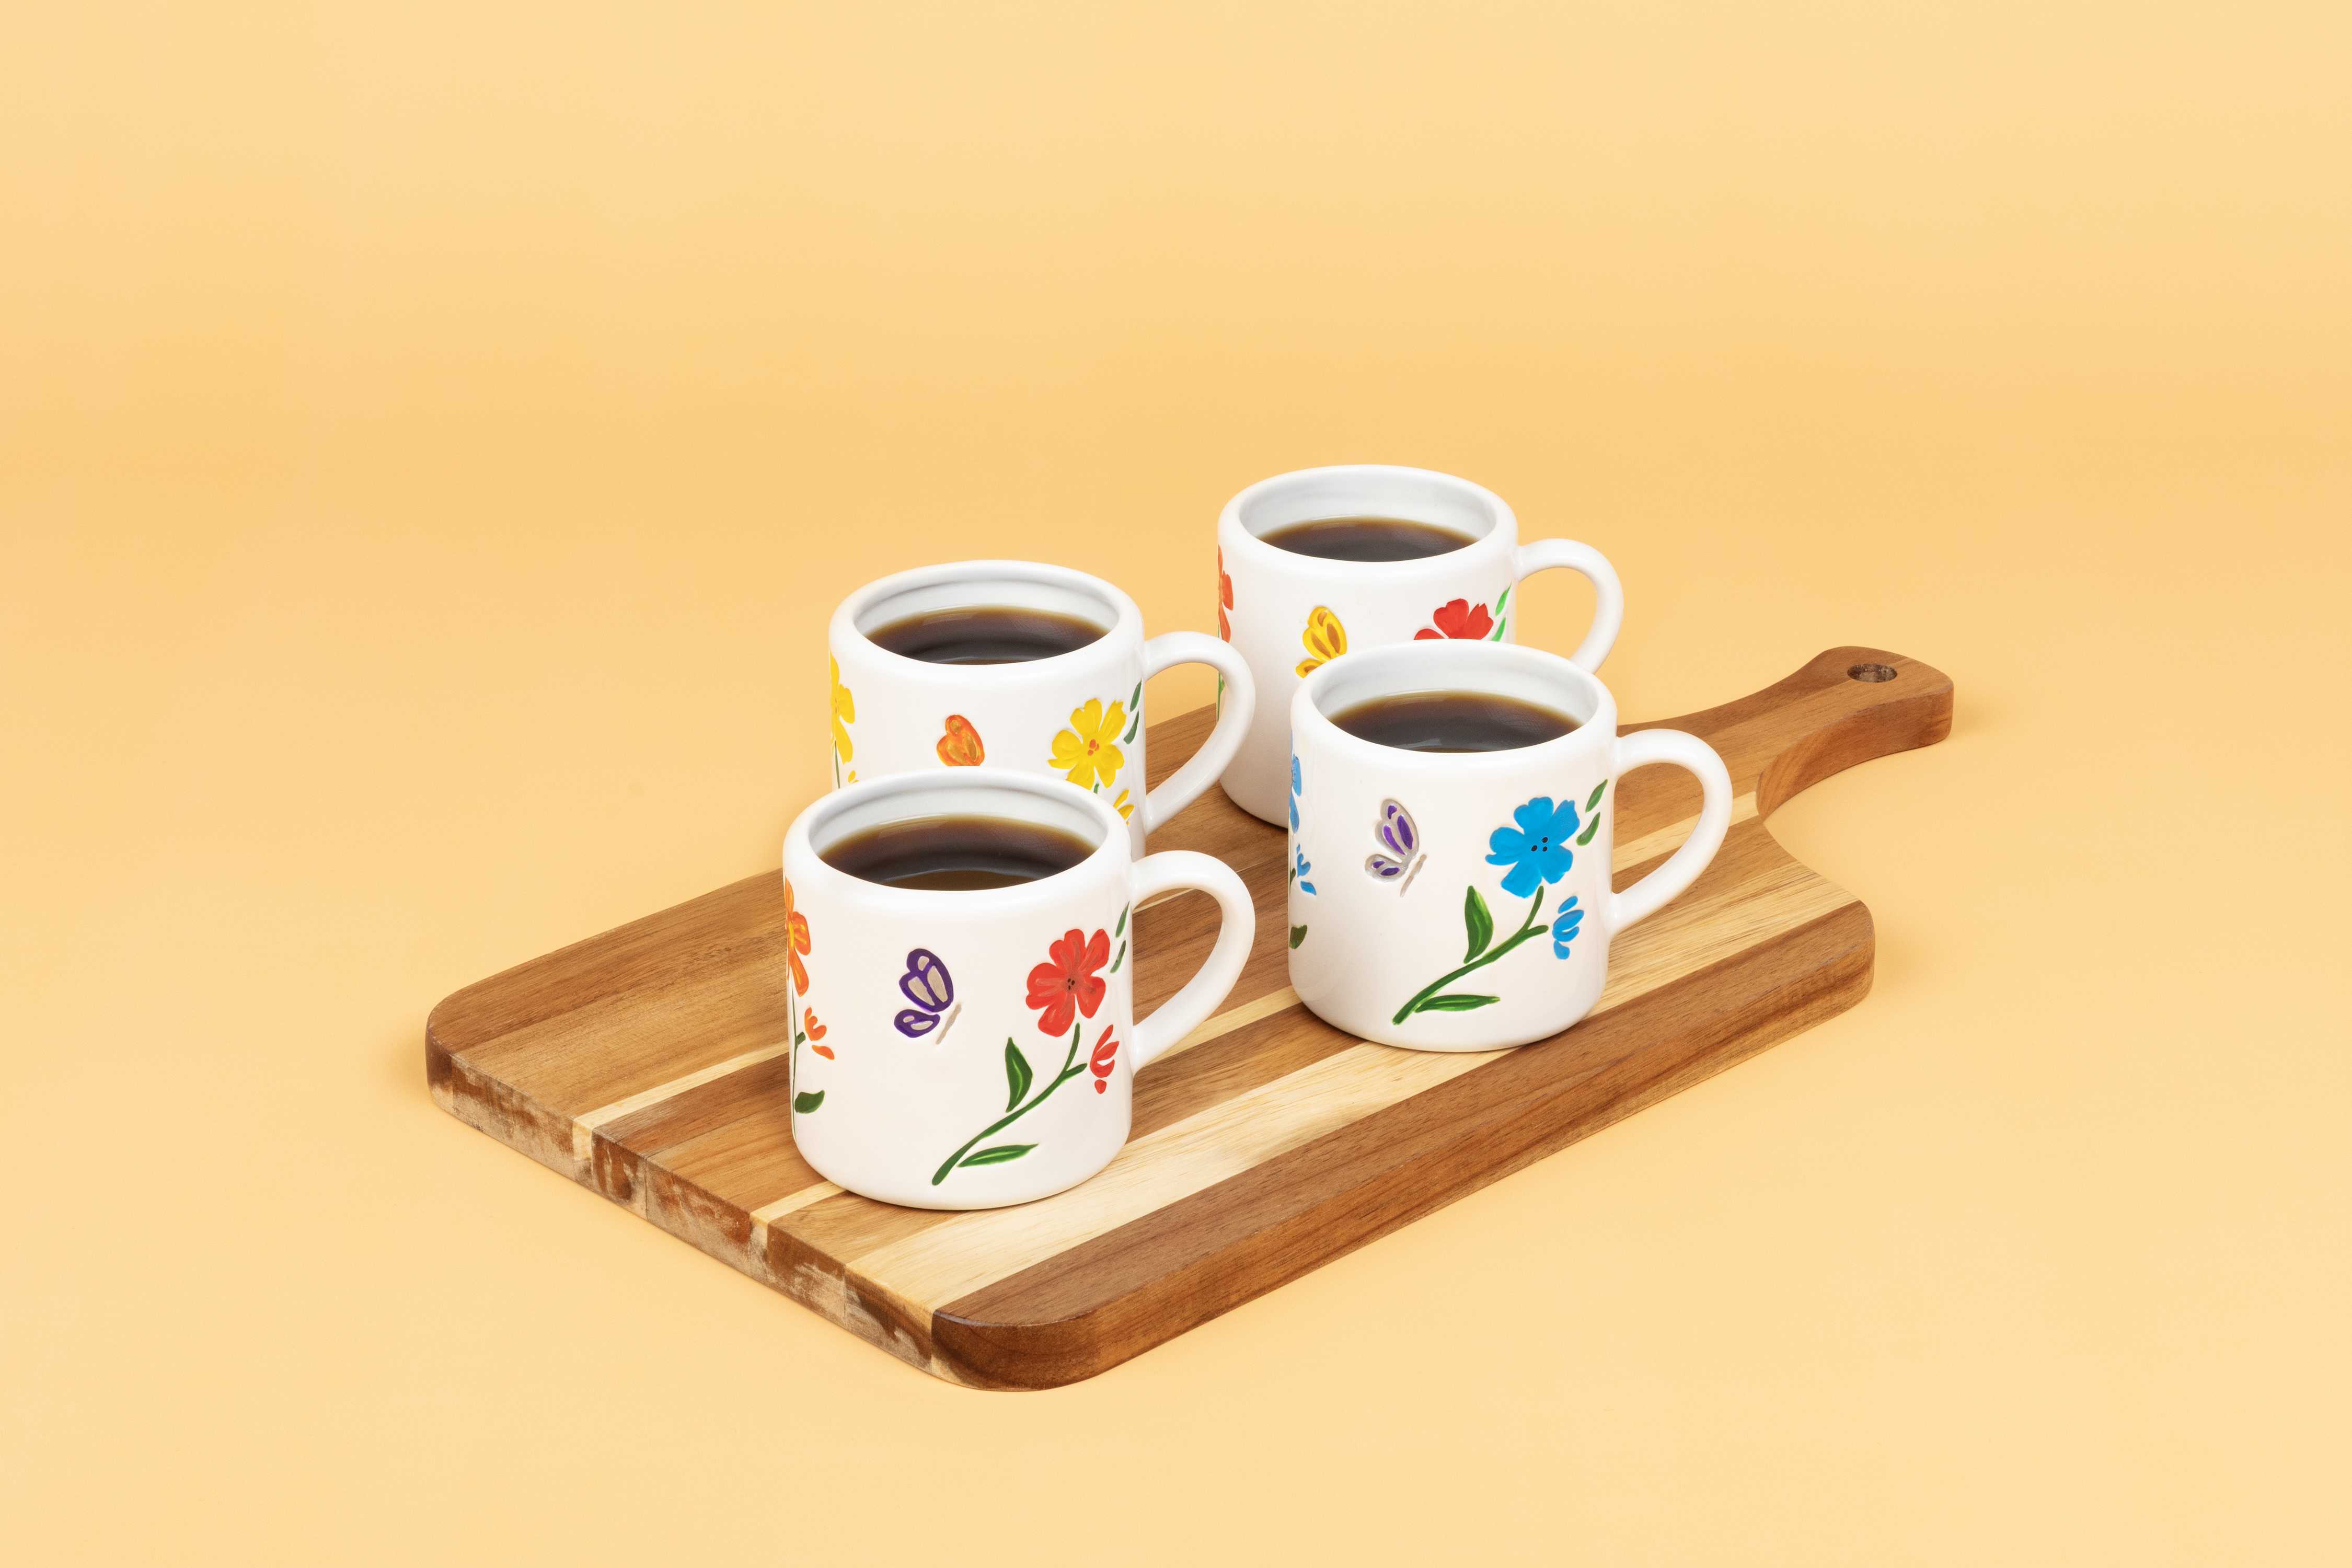 Bake and enjoy your floral painted mugs